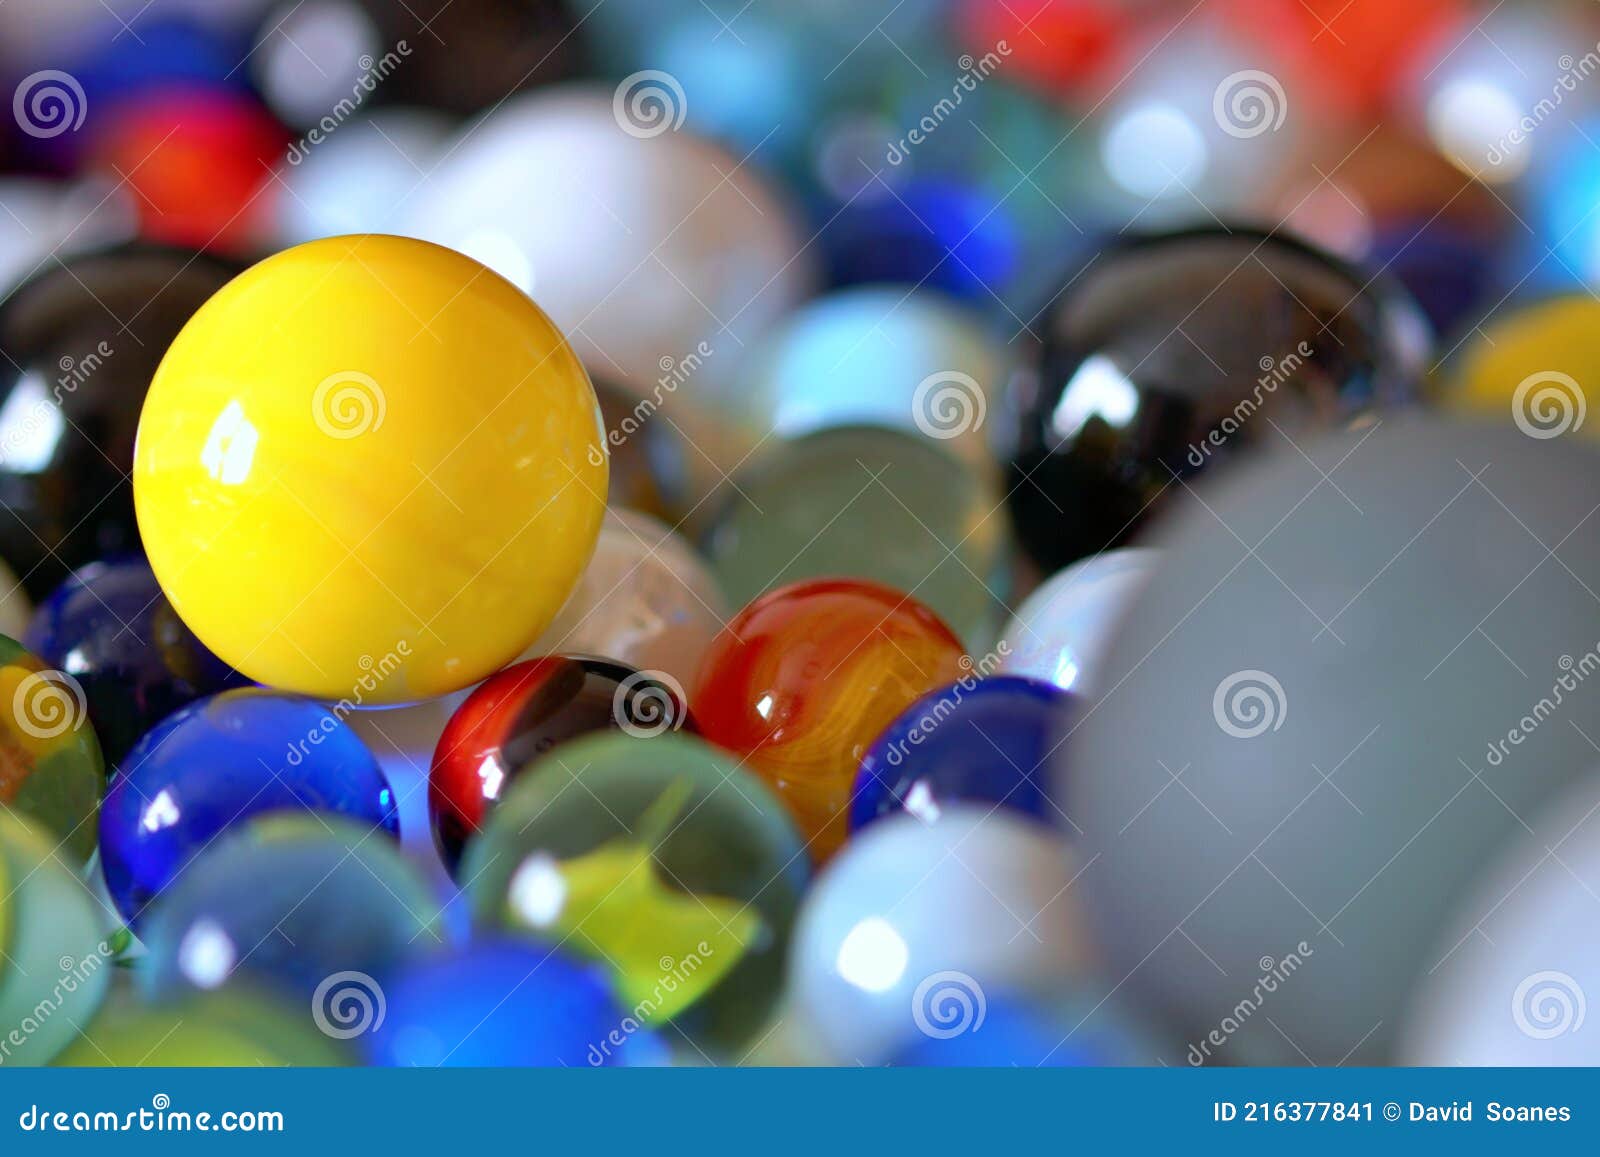 yellow marbles are so collectable and stand out when placed together - stock photo